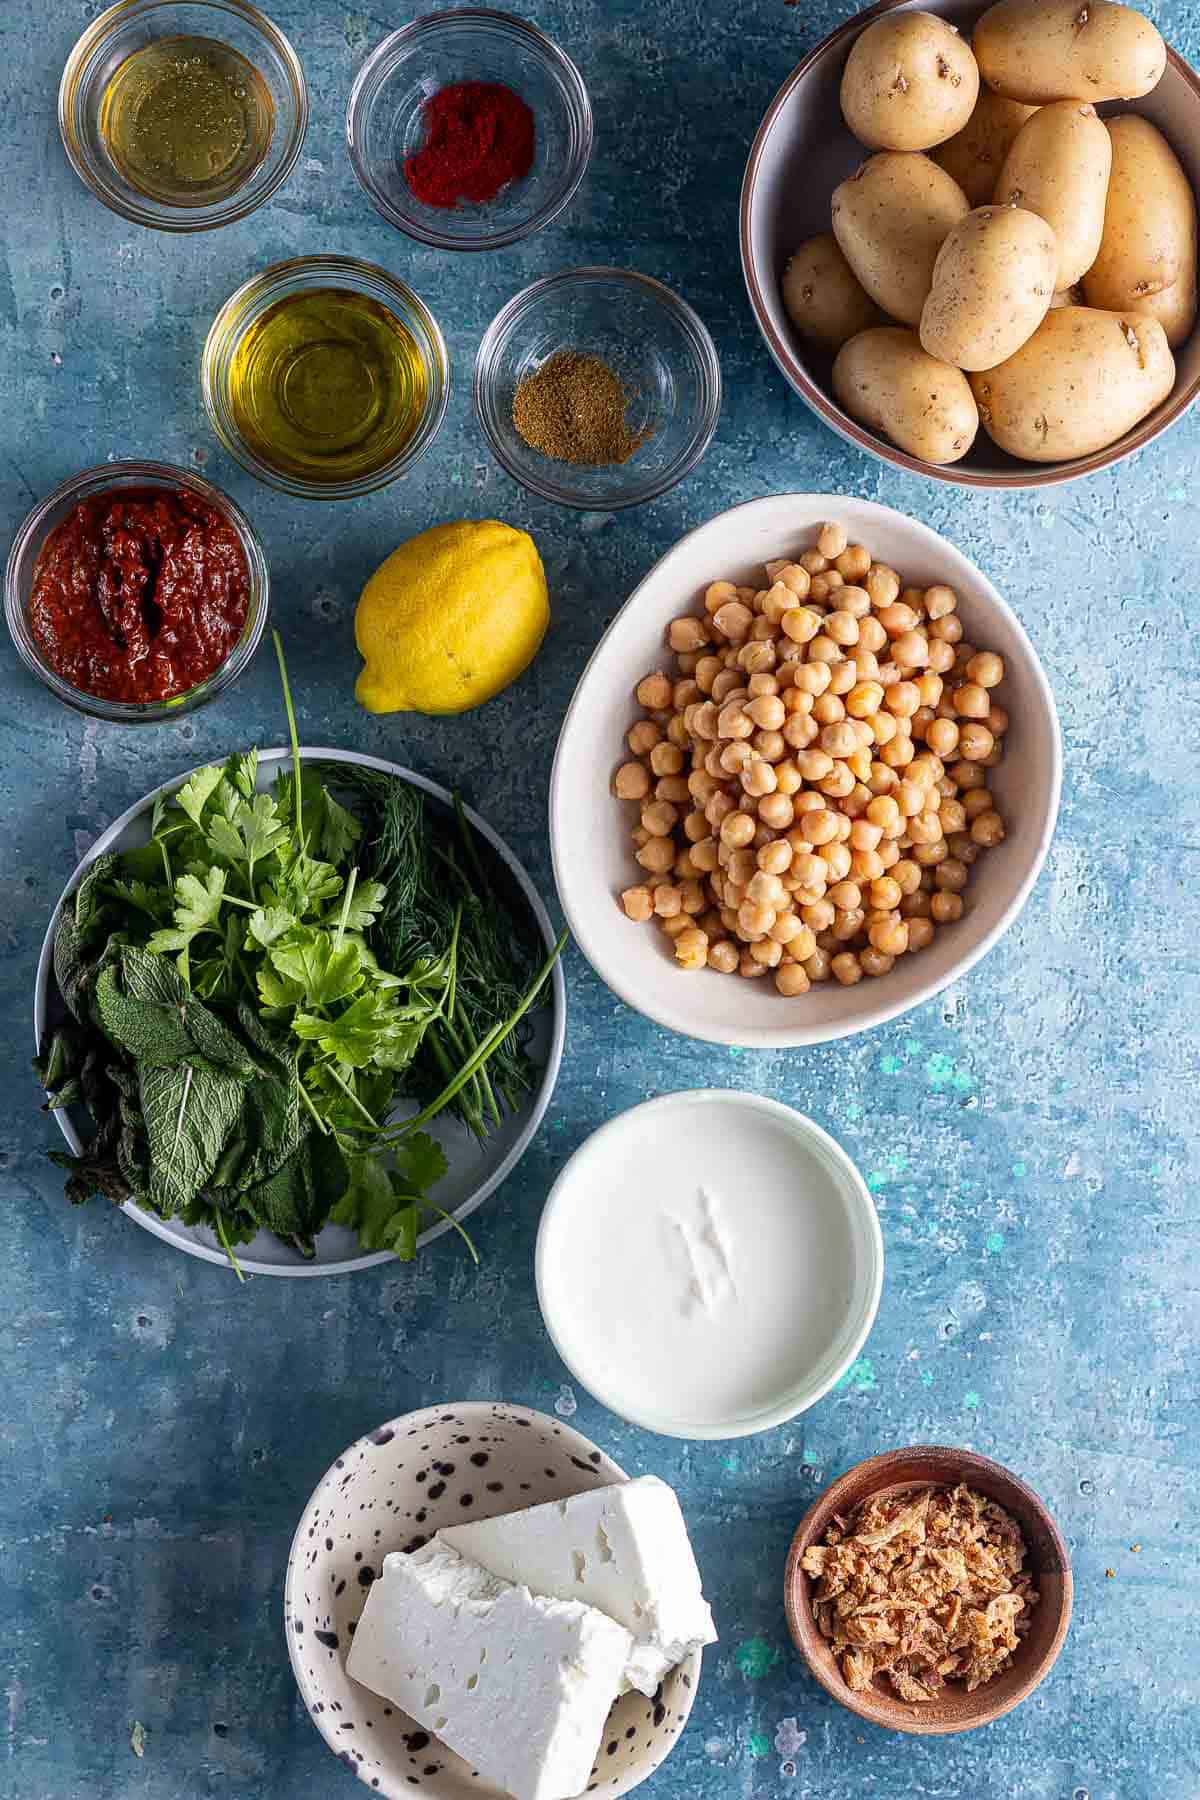 Ingredients on a blue background